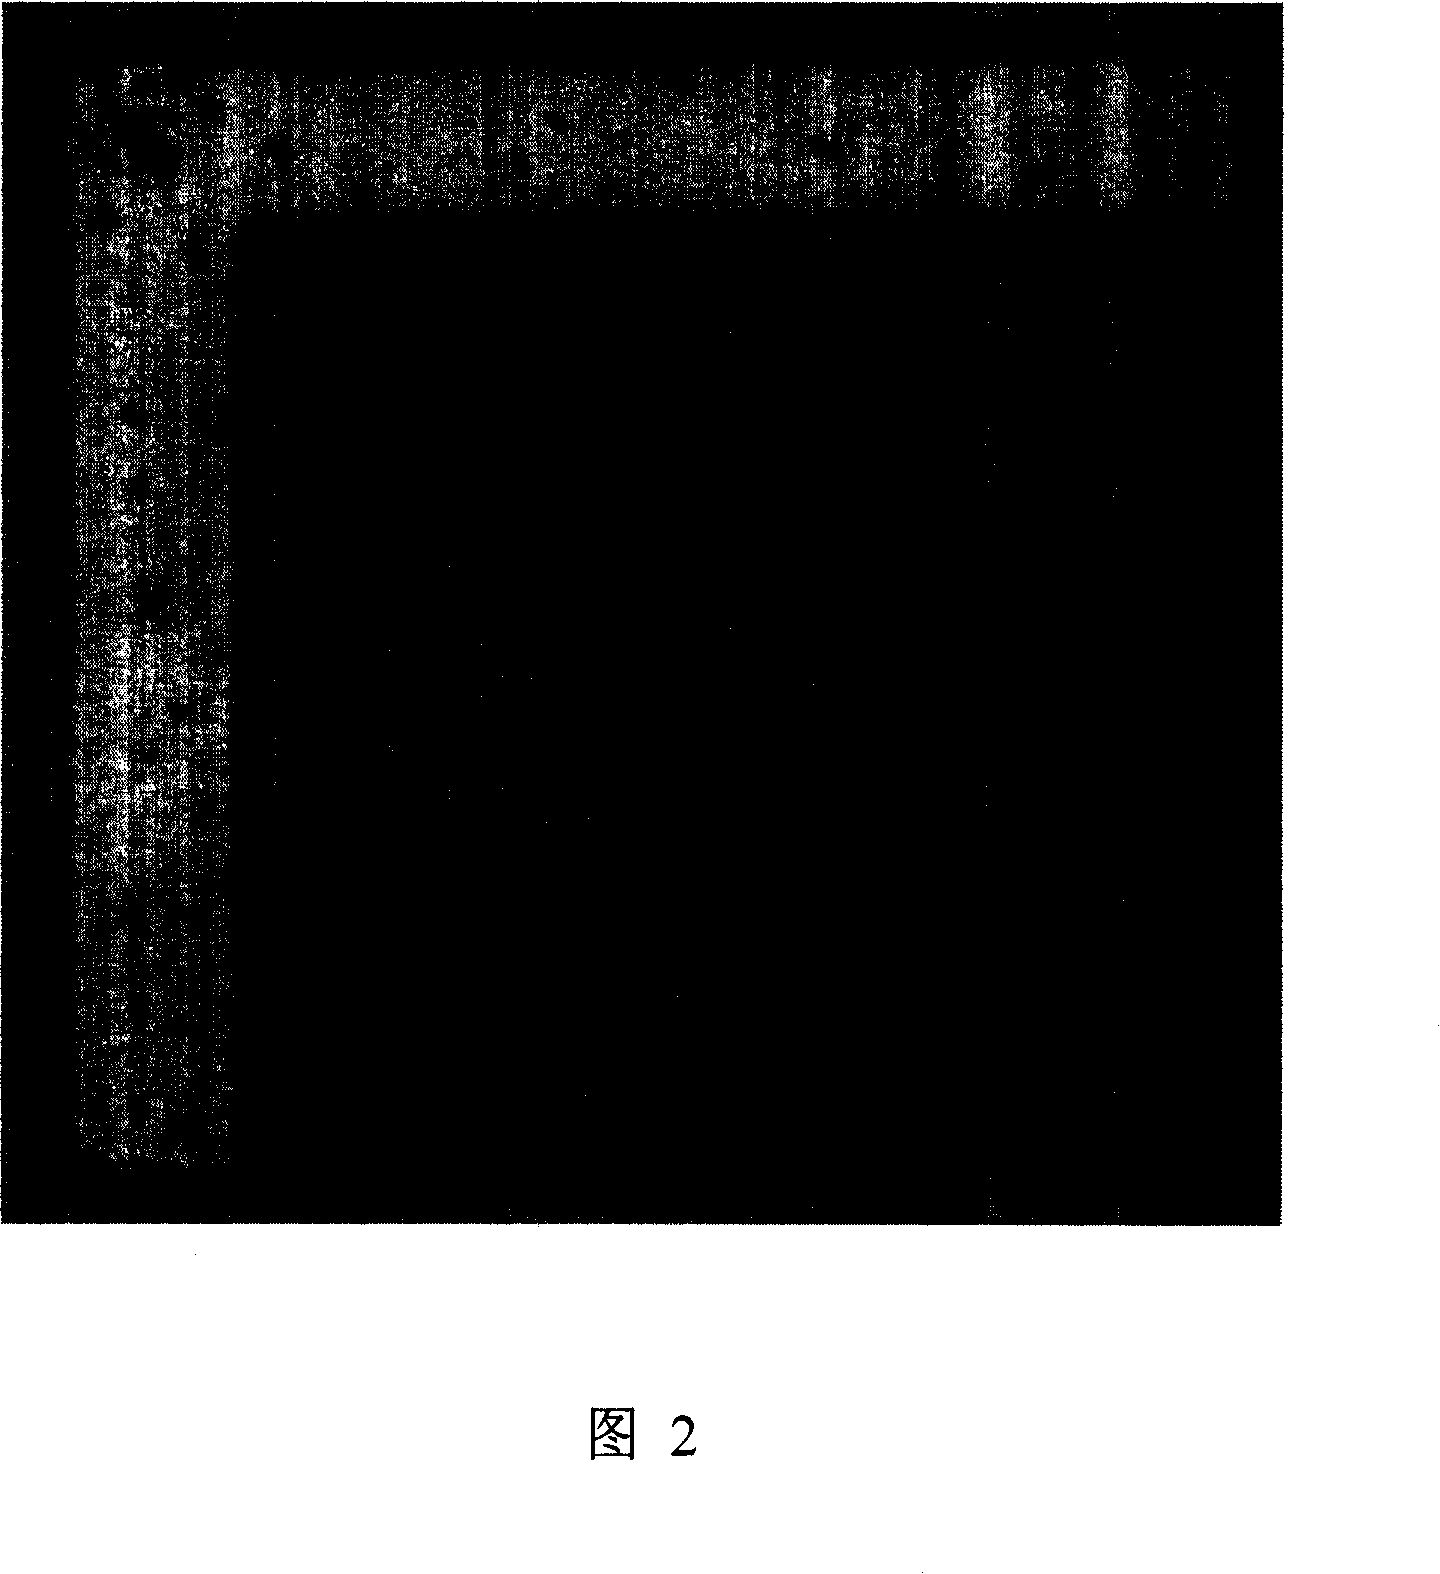 Electron beam alignment mark manufacture method and its uses